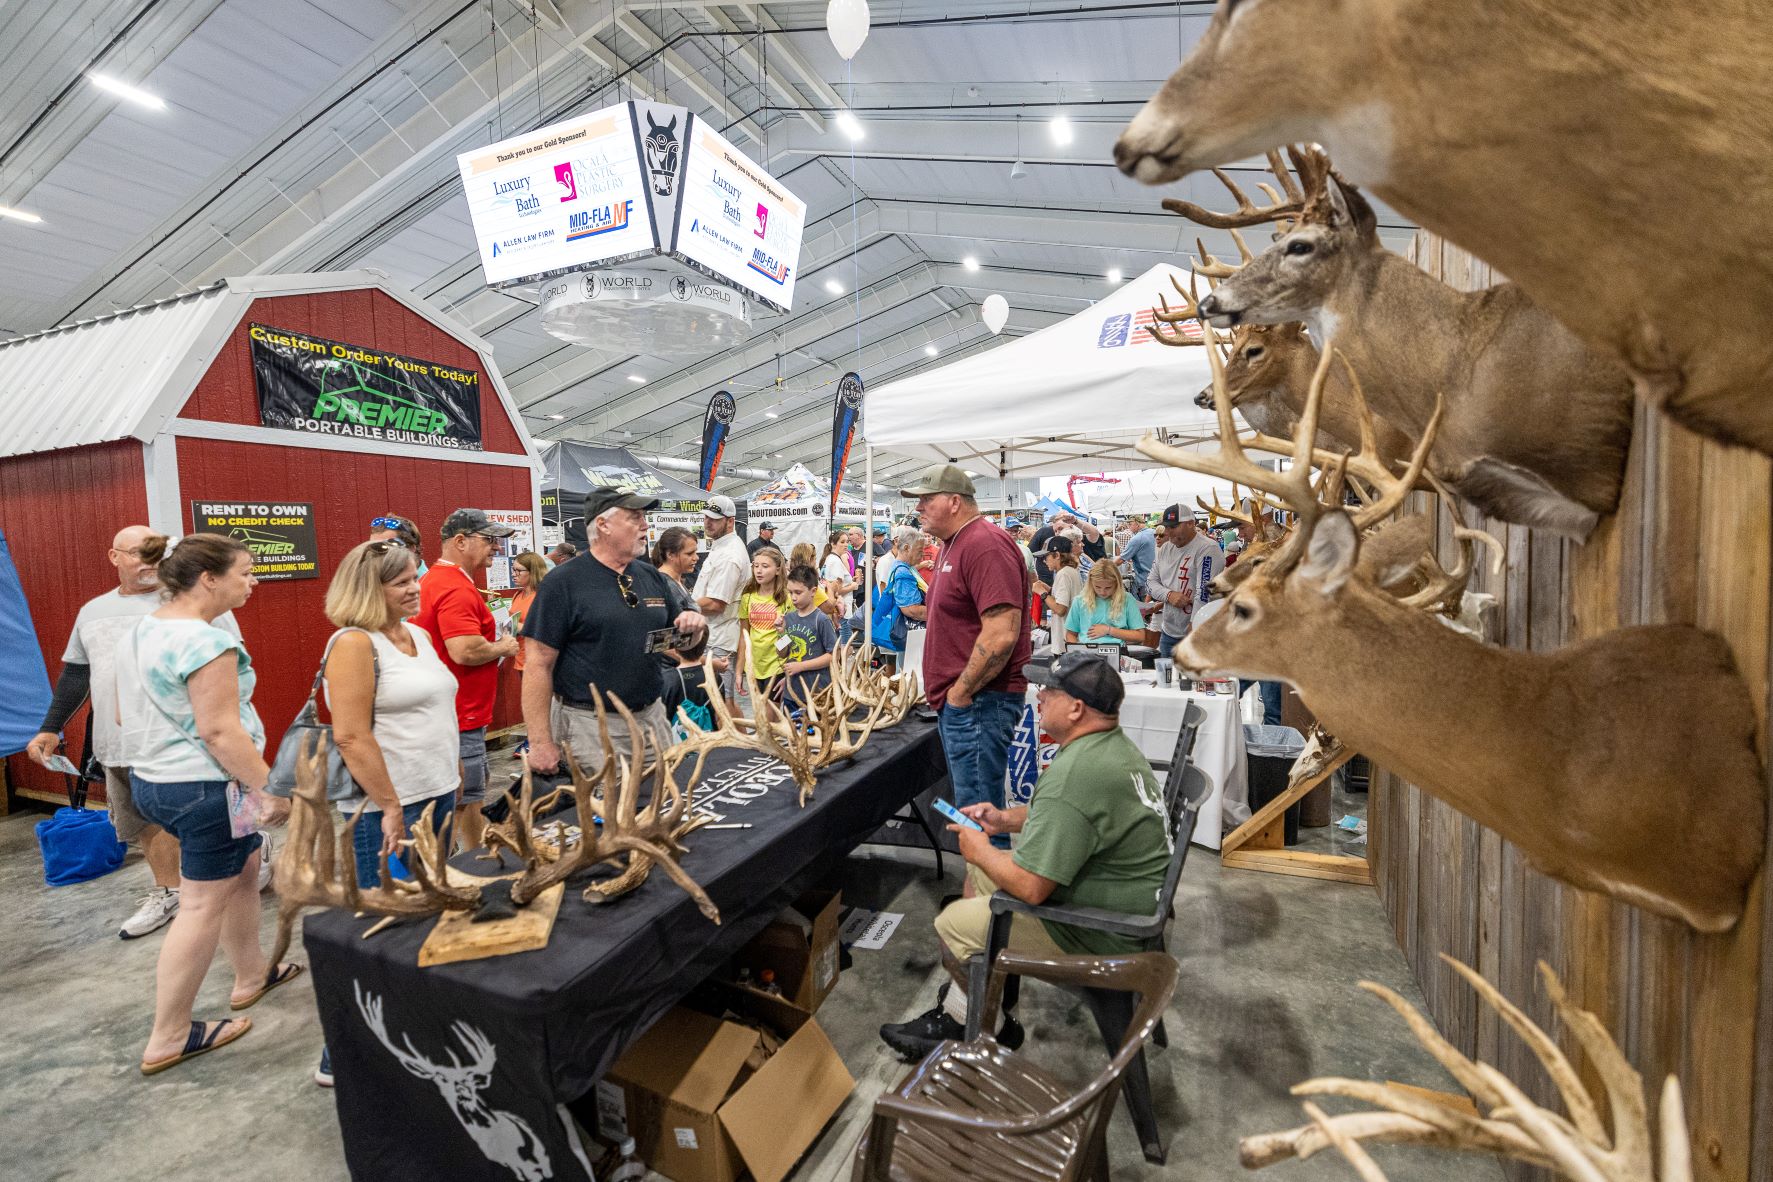 A display booth showcases several mounted deer with antlers on the table. A seated man talks happily with several onlookers.